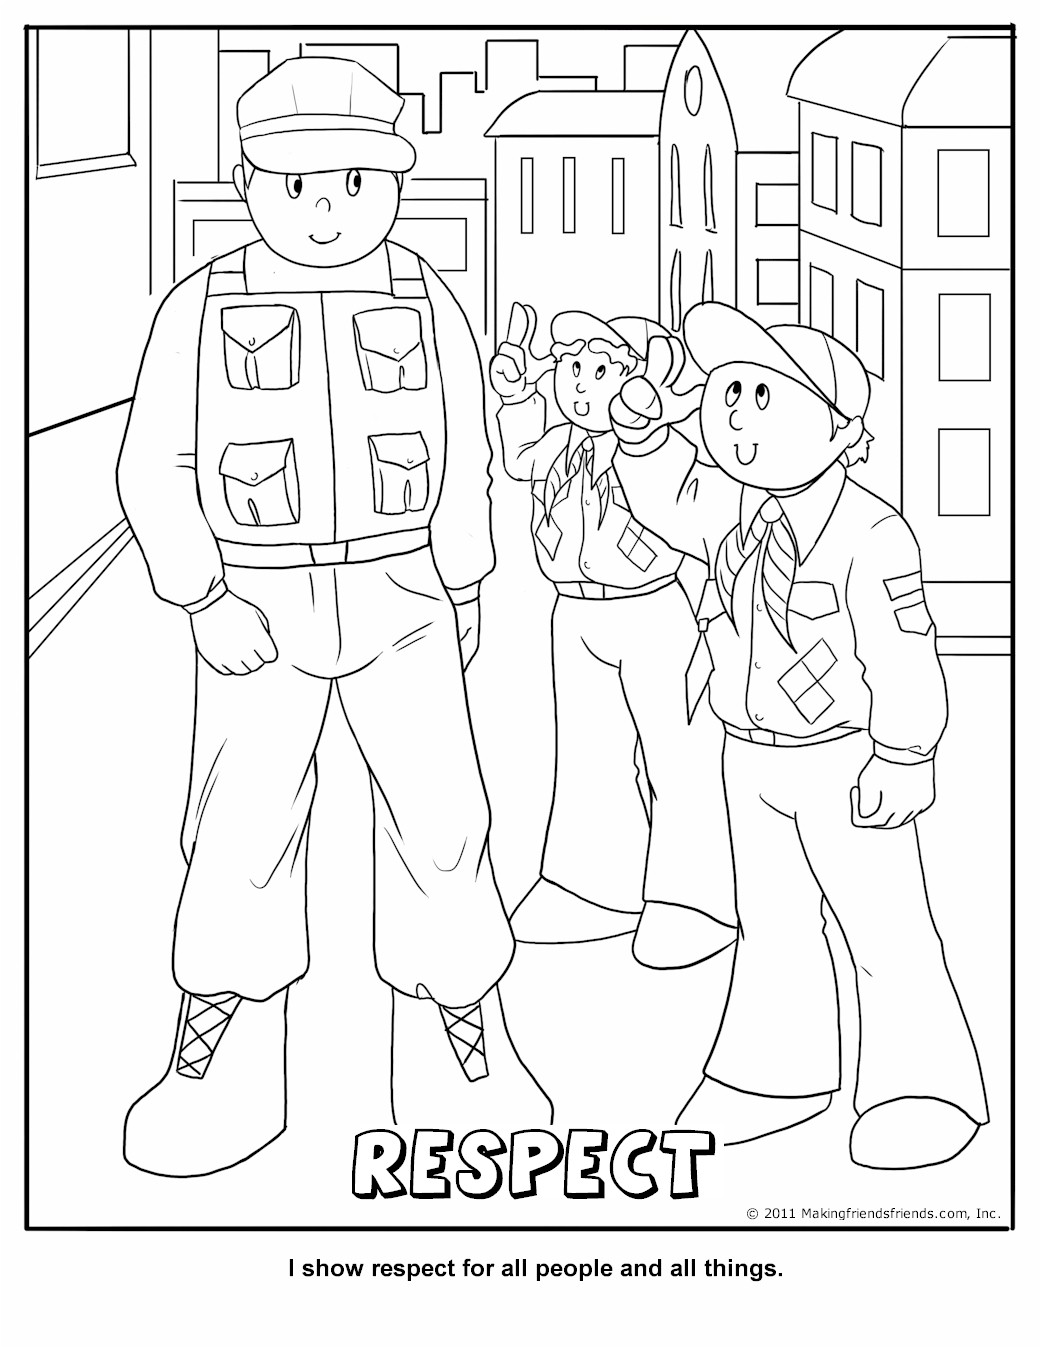 Cub Scout Respect Coloring Page